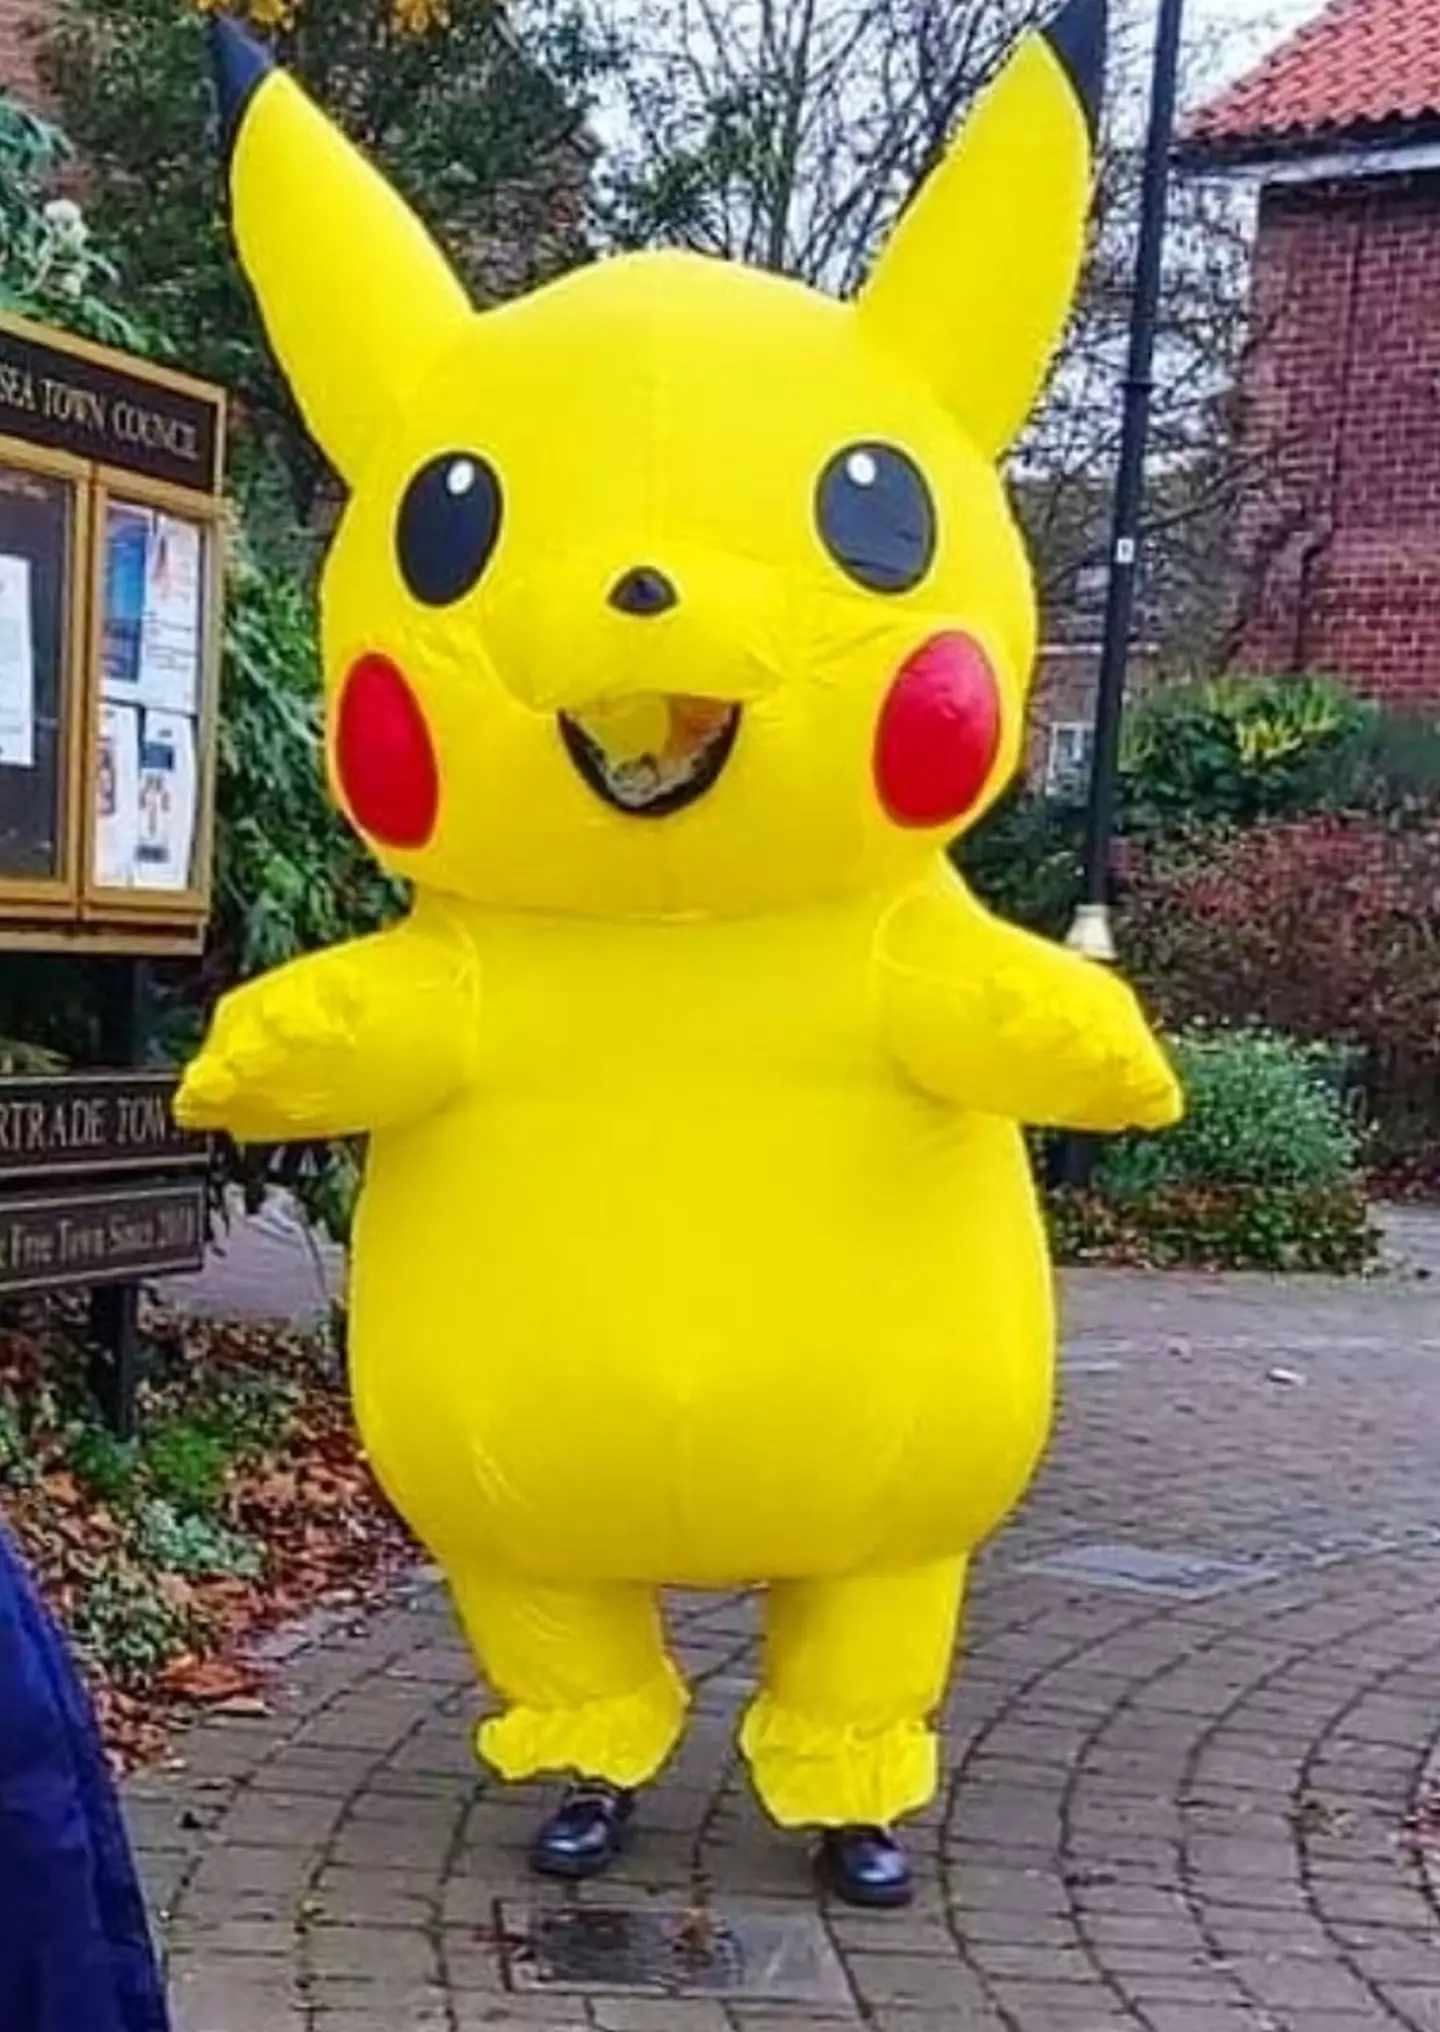 Alice dressed up as Pikachu (